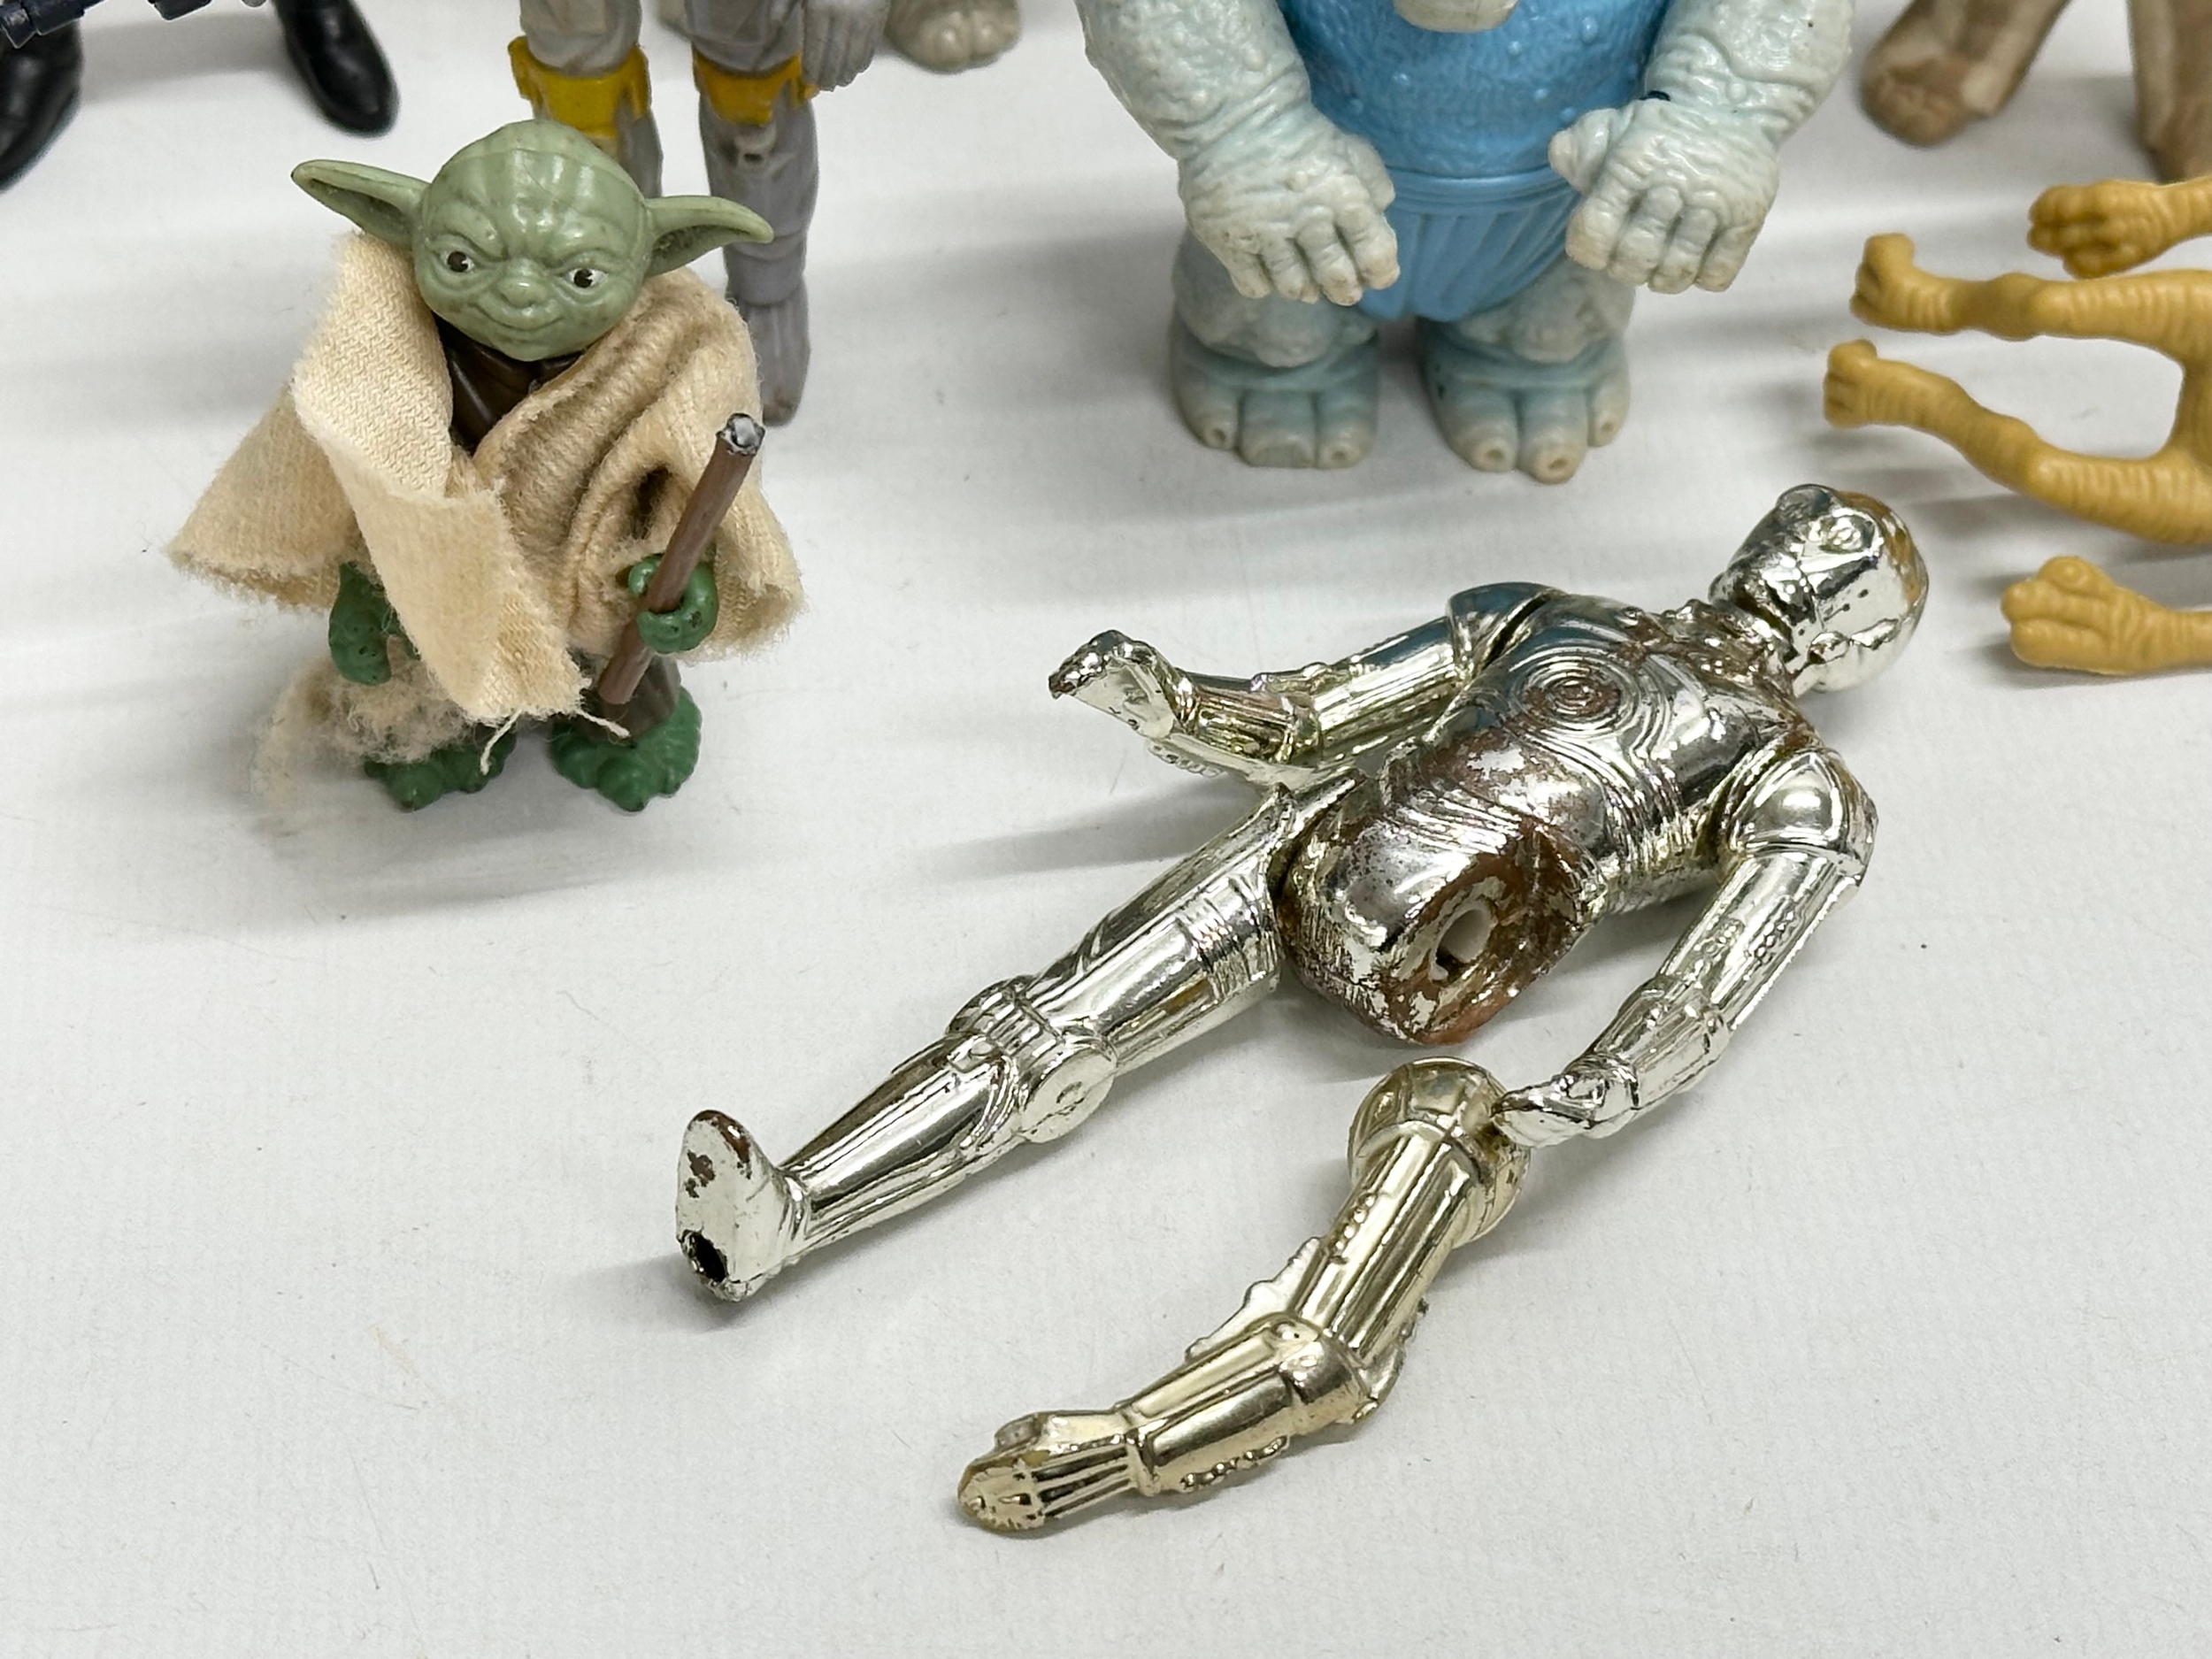 A collection of 1970’s/80’s Star Wars action figures and weapons. - Image 6 of 24